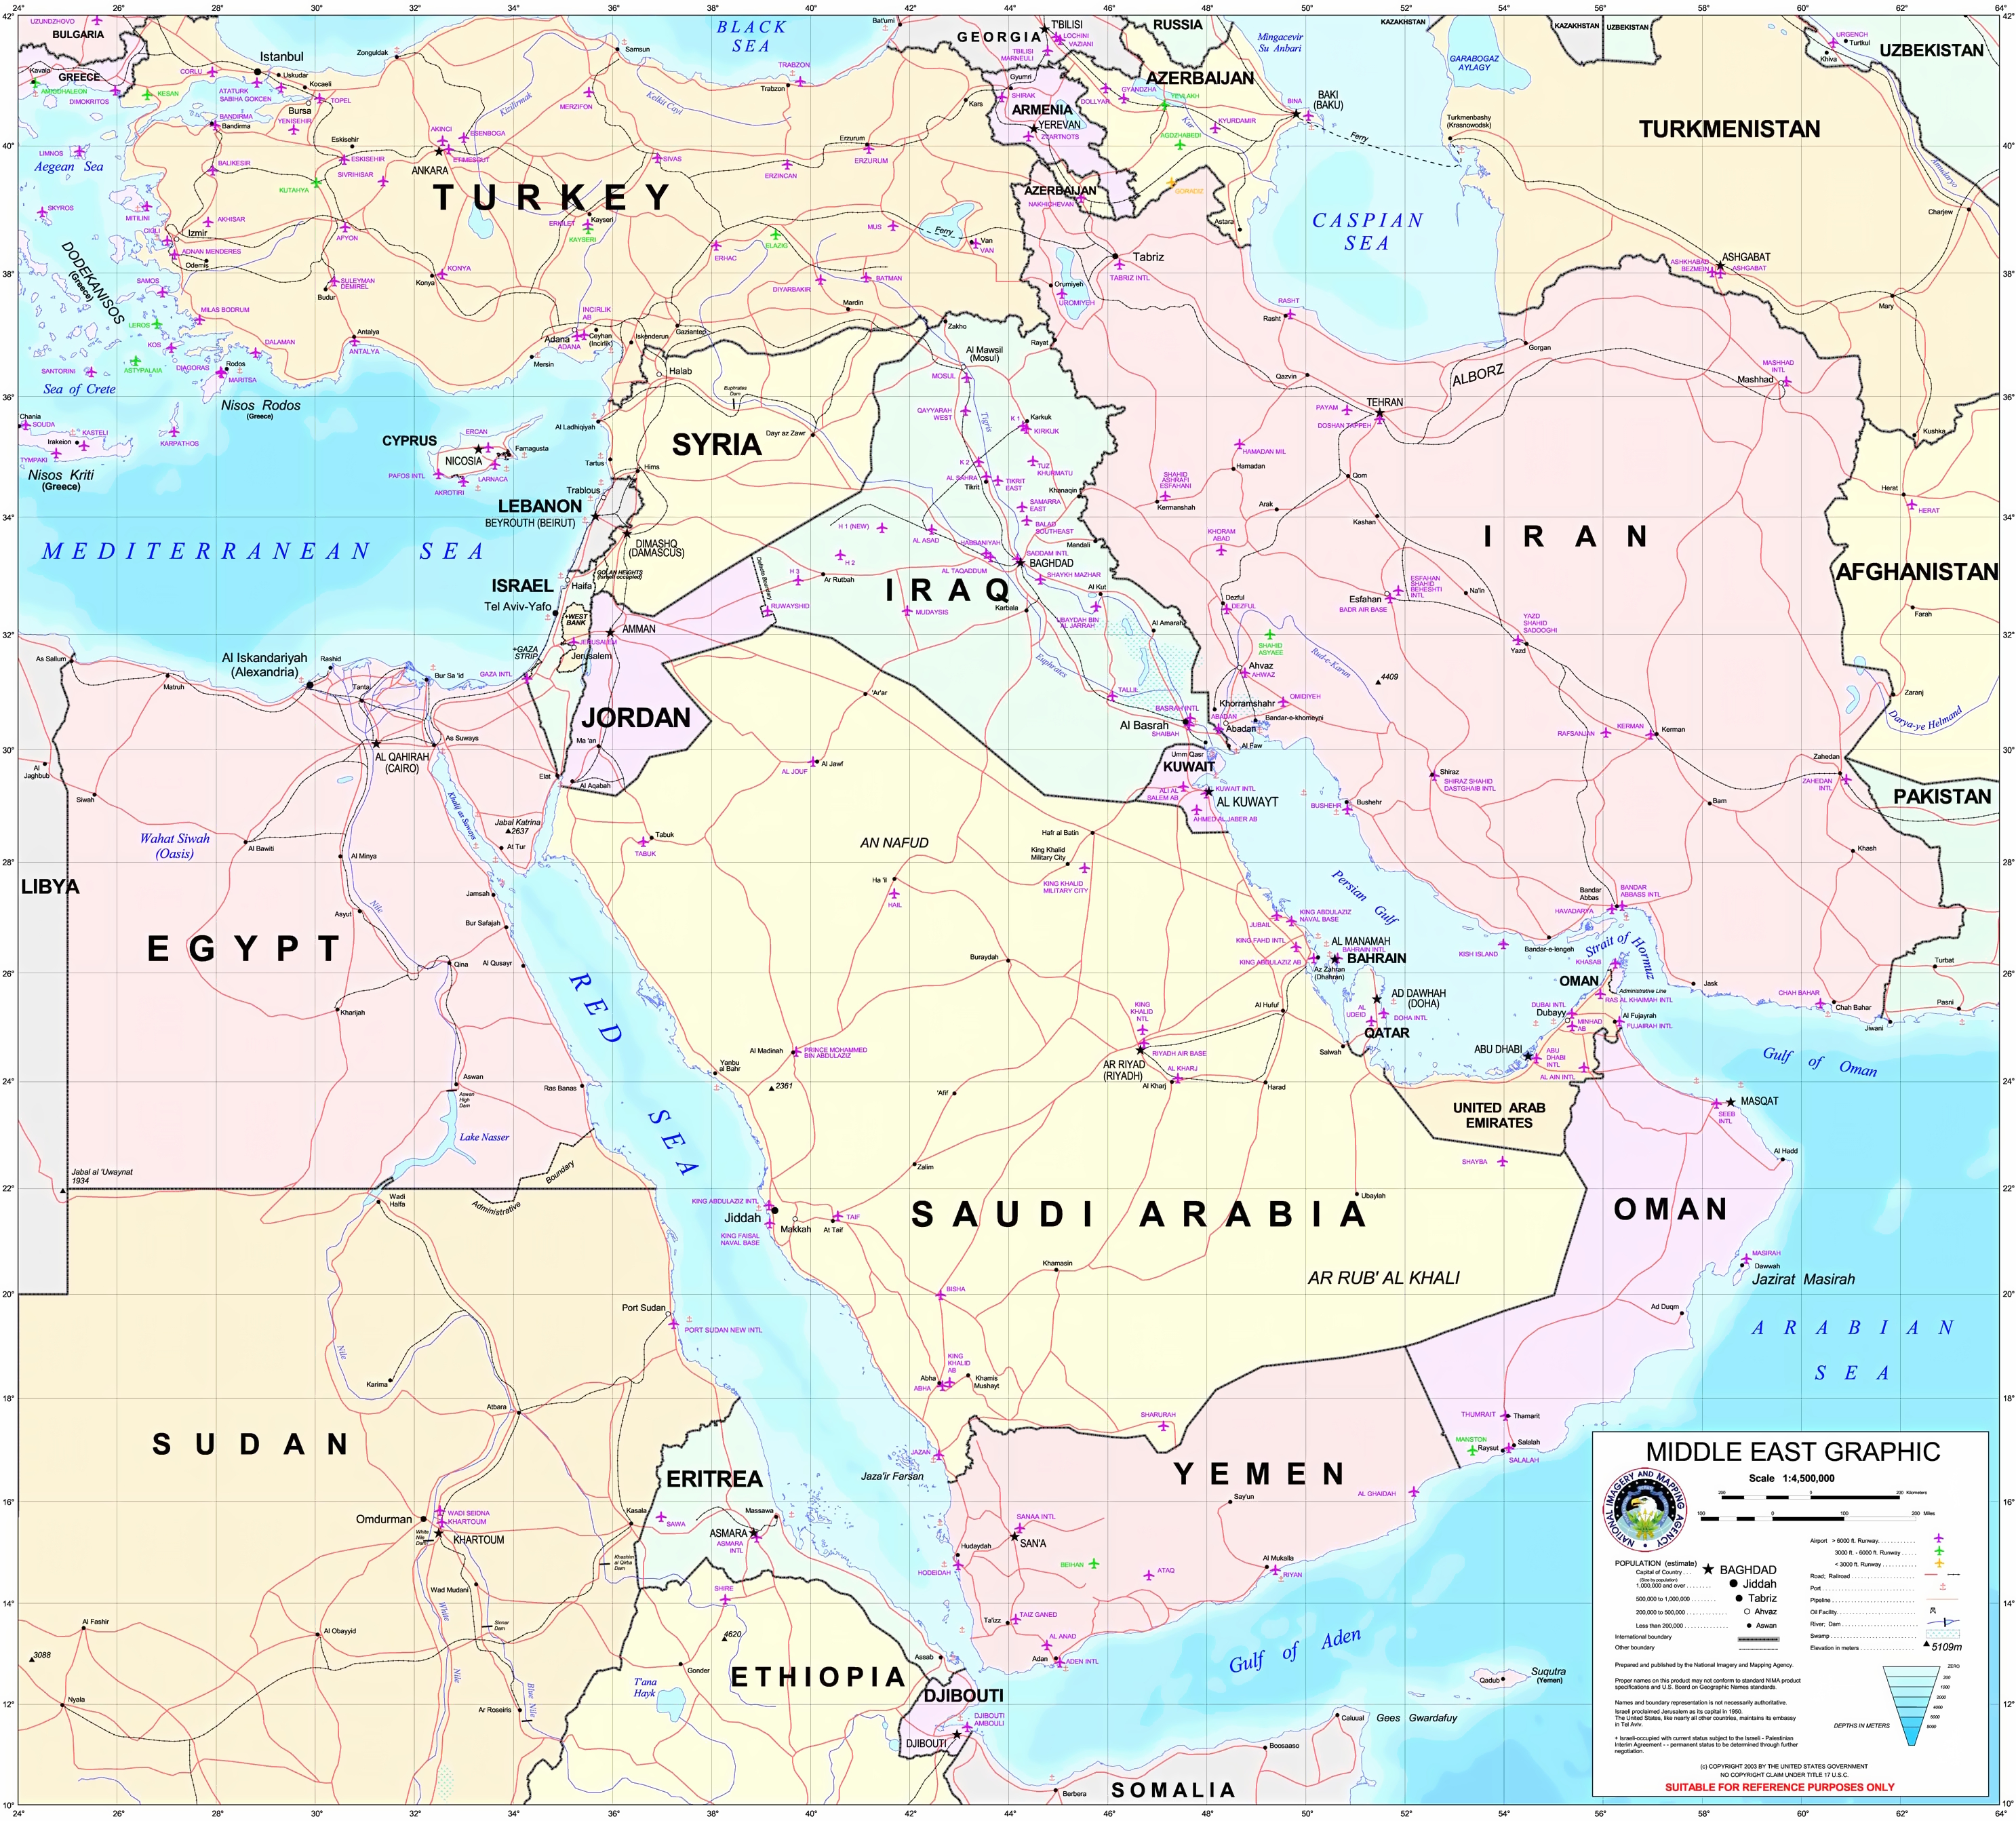 middle_east_graphic_2003.jpg